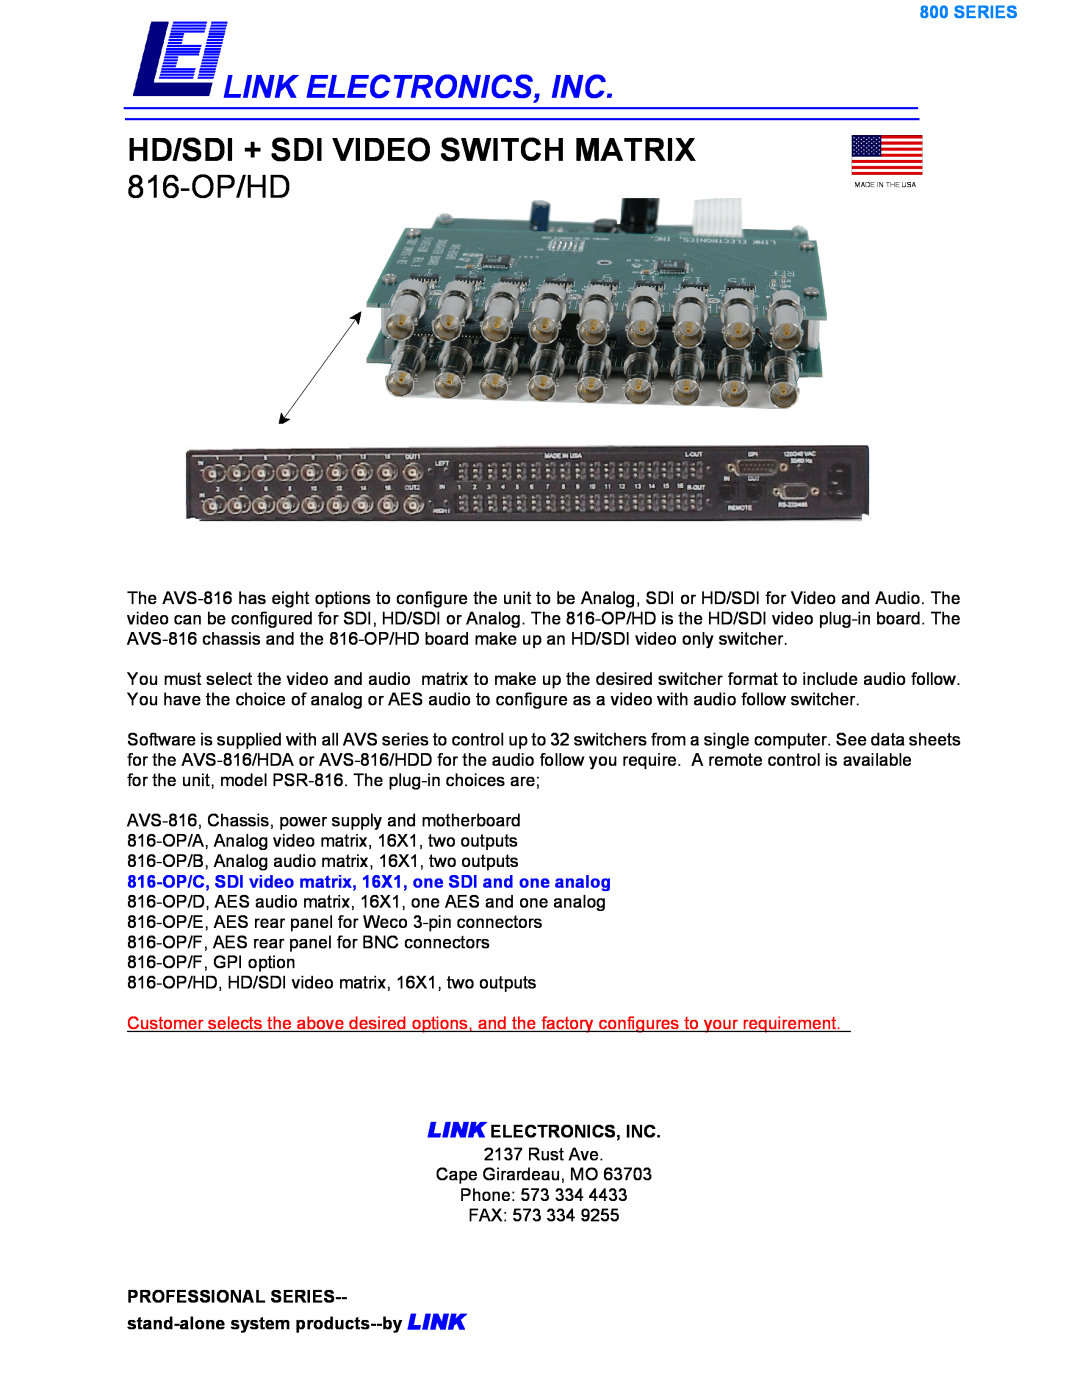 Link electronic 816-OP/HD manual Link Electronics, Inc, PROFESSIONAL SERIES-- stand-alone system products--by LINK, Series 